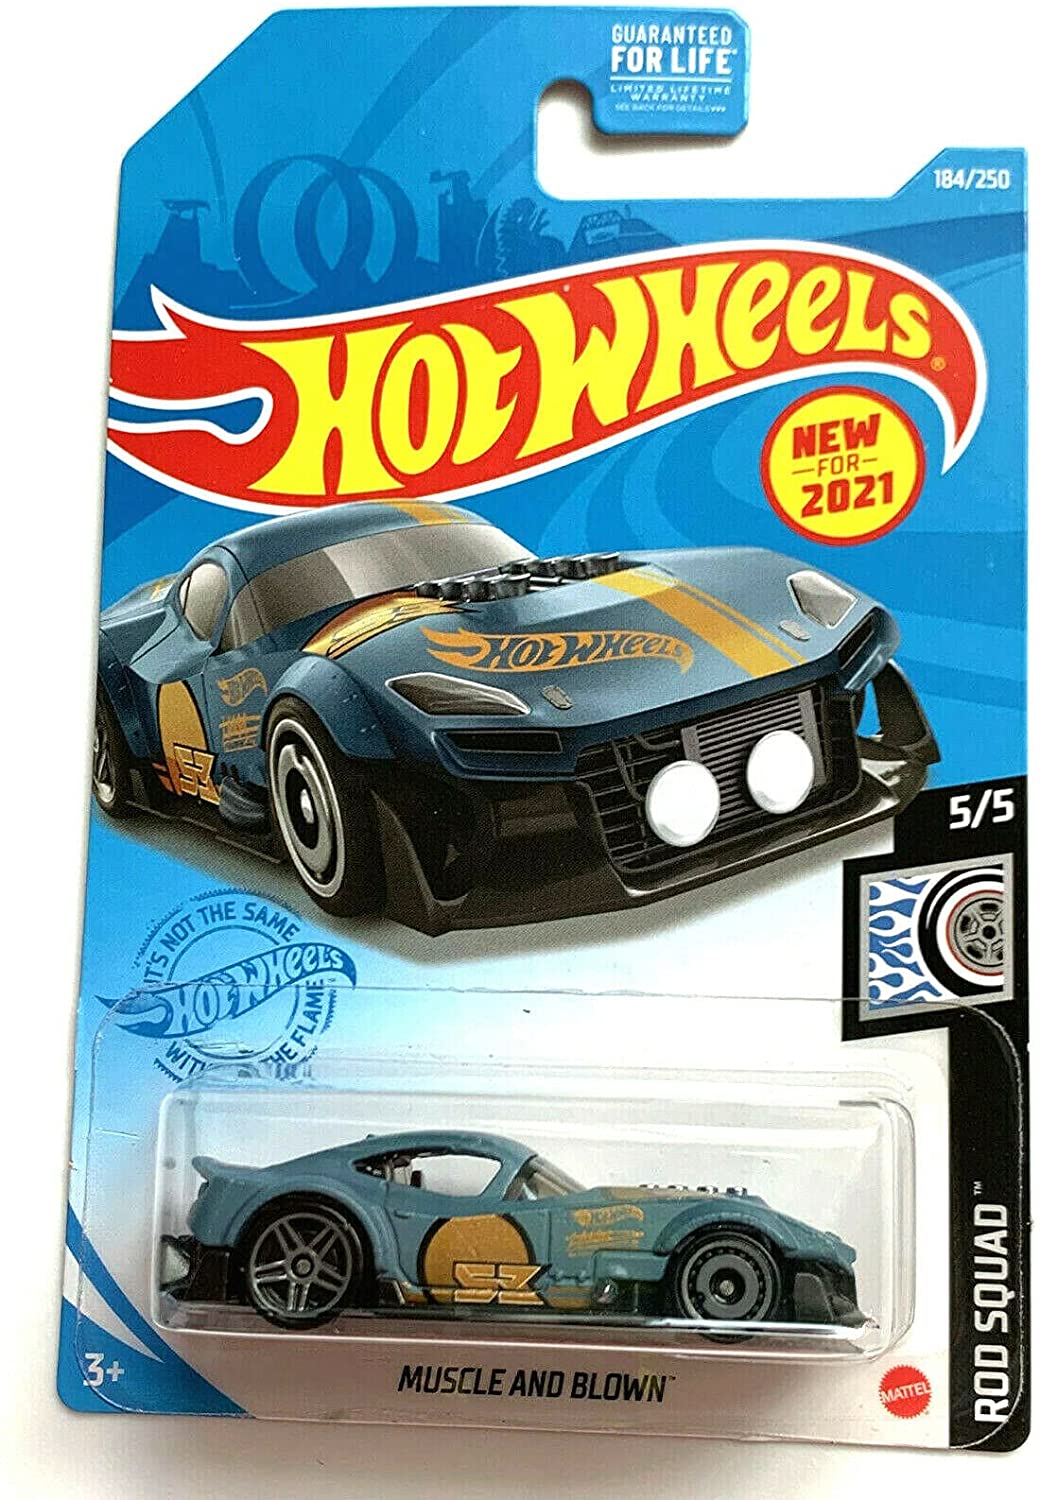 Hot Wheels Muscle and Blown, Rod Squad 5/5 Gray 184/250